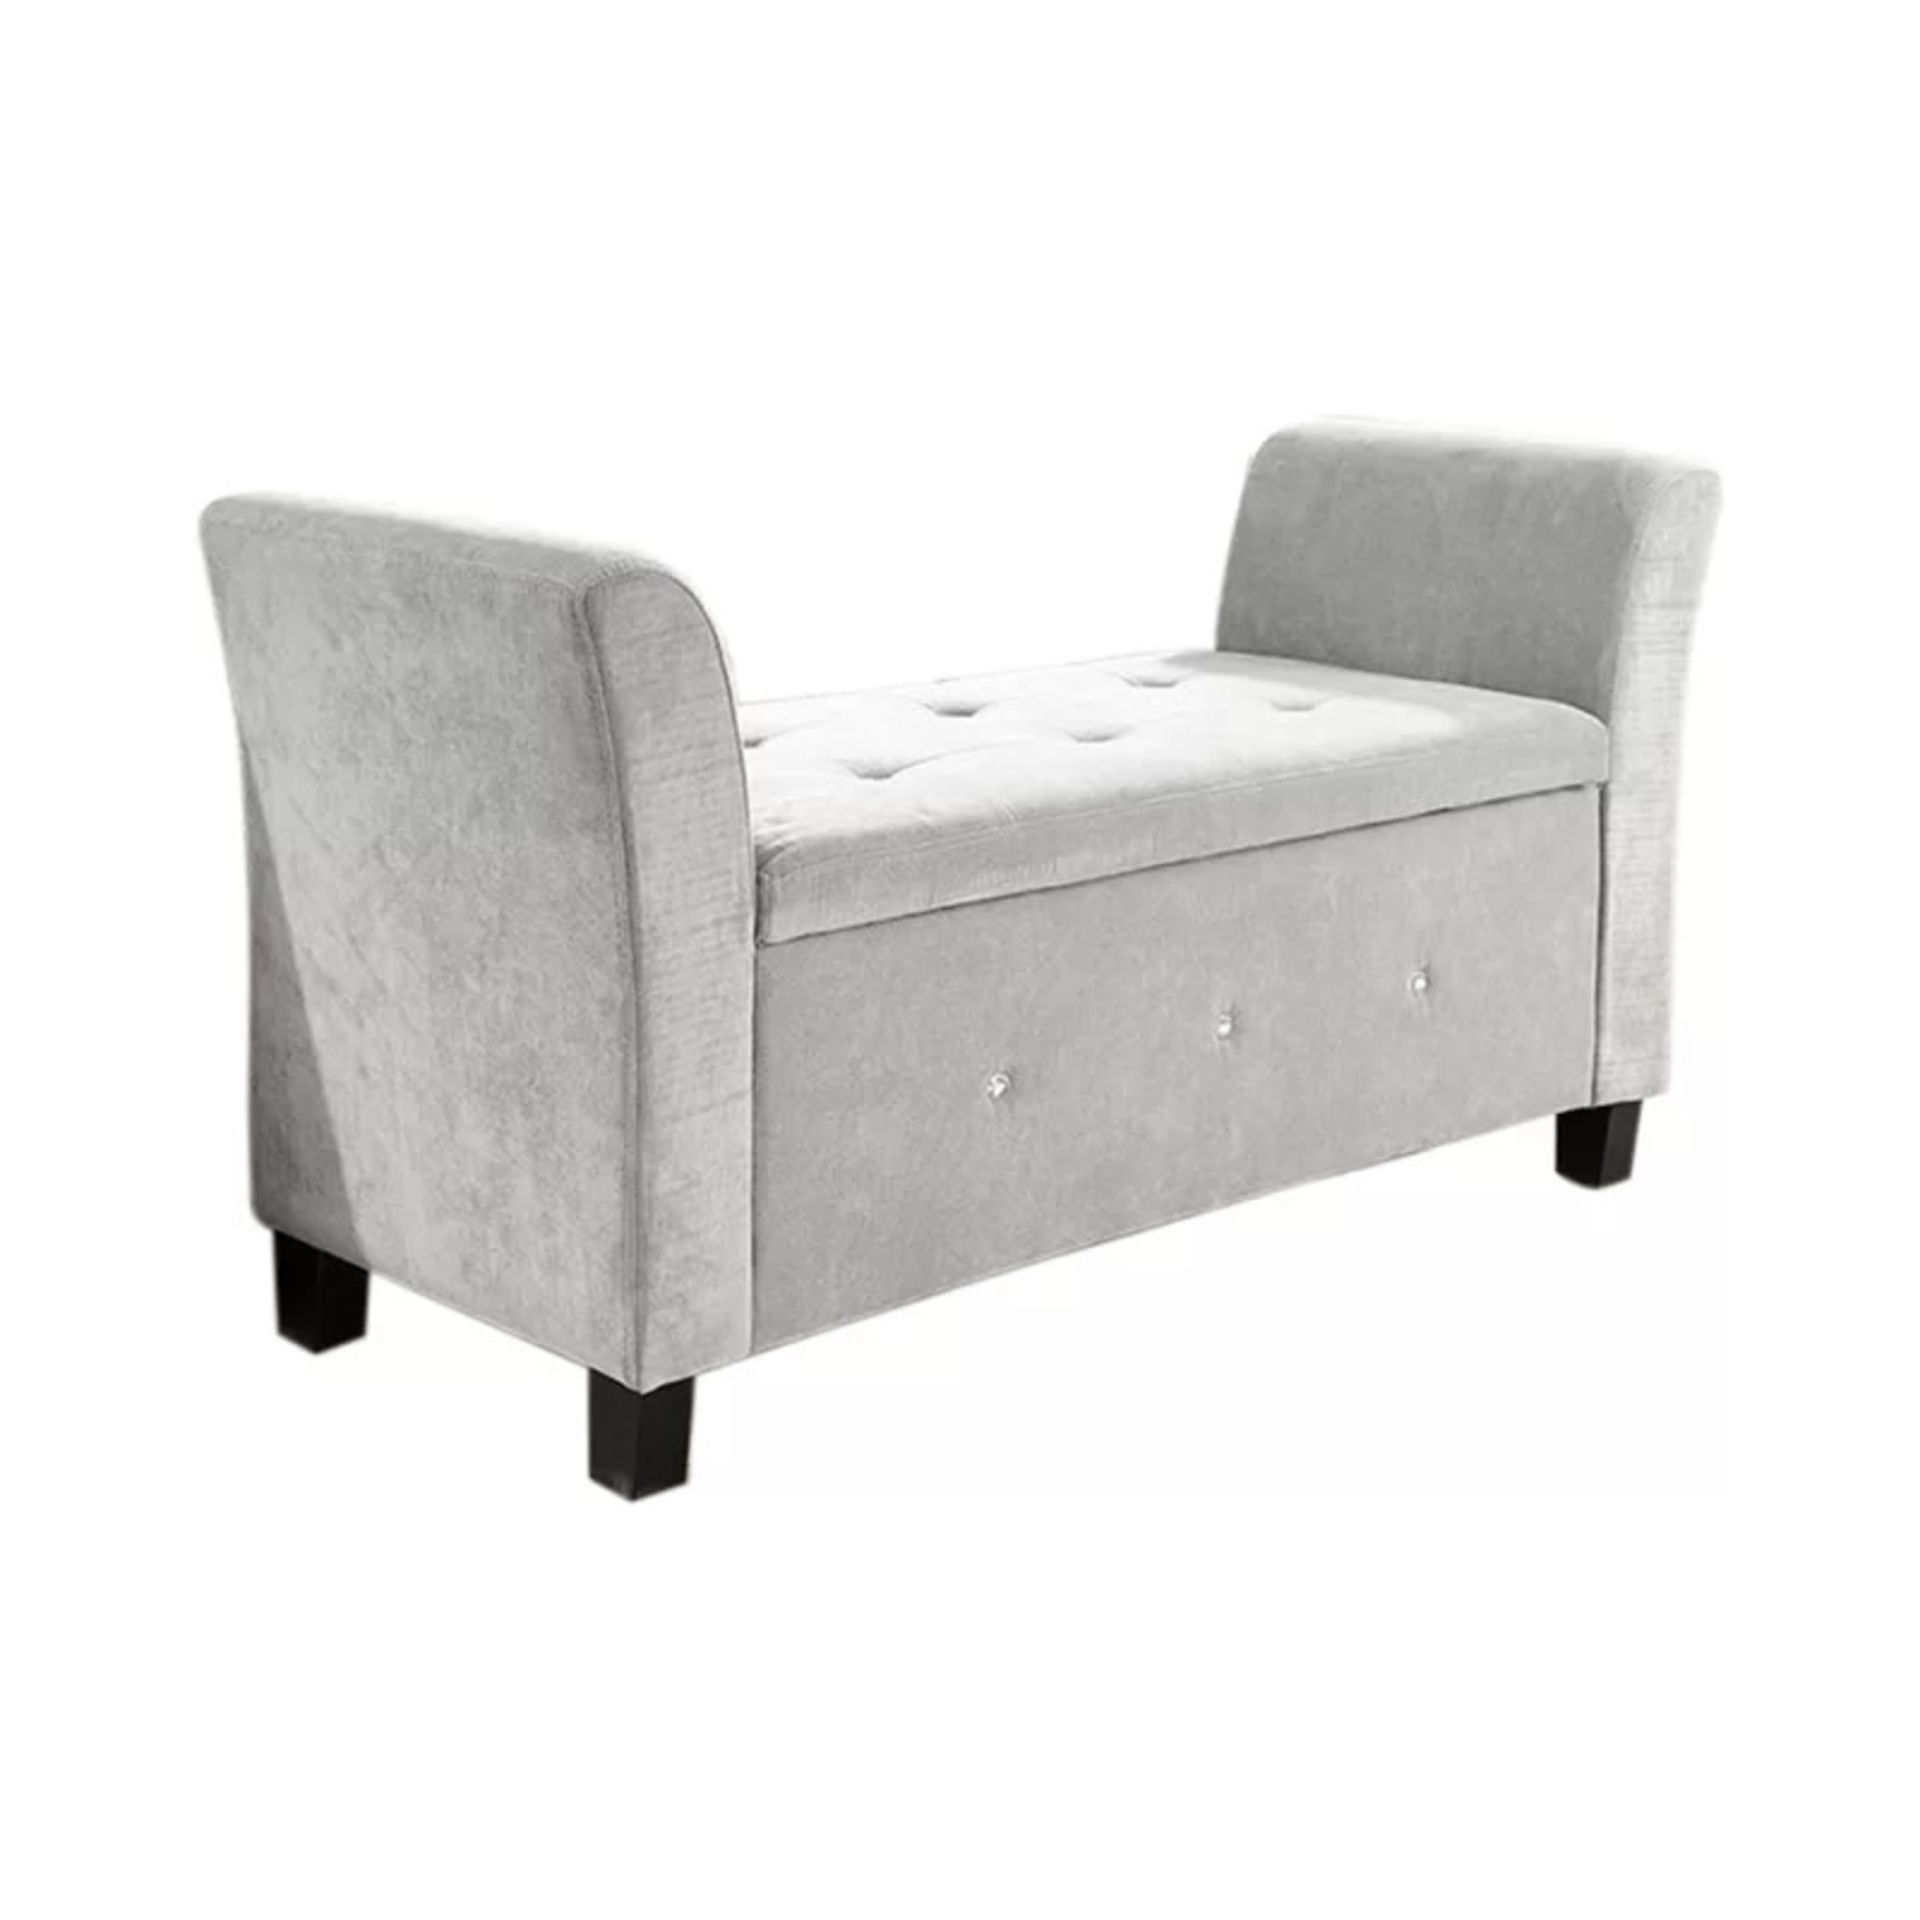 Cambridgeshire Upholstered Bench Tufted Button Seat Upholstered in Silver Soft Chenille Fabric